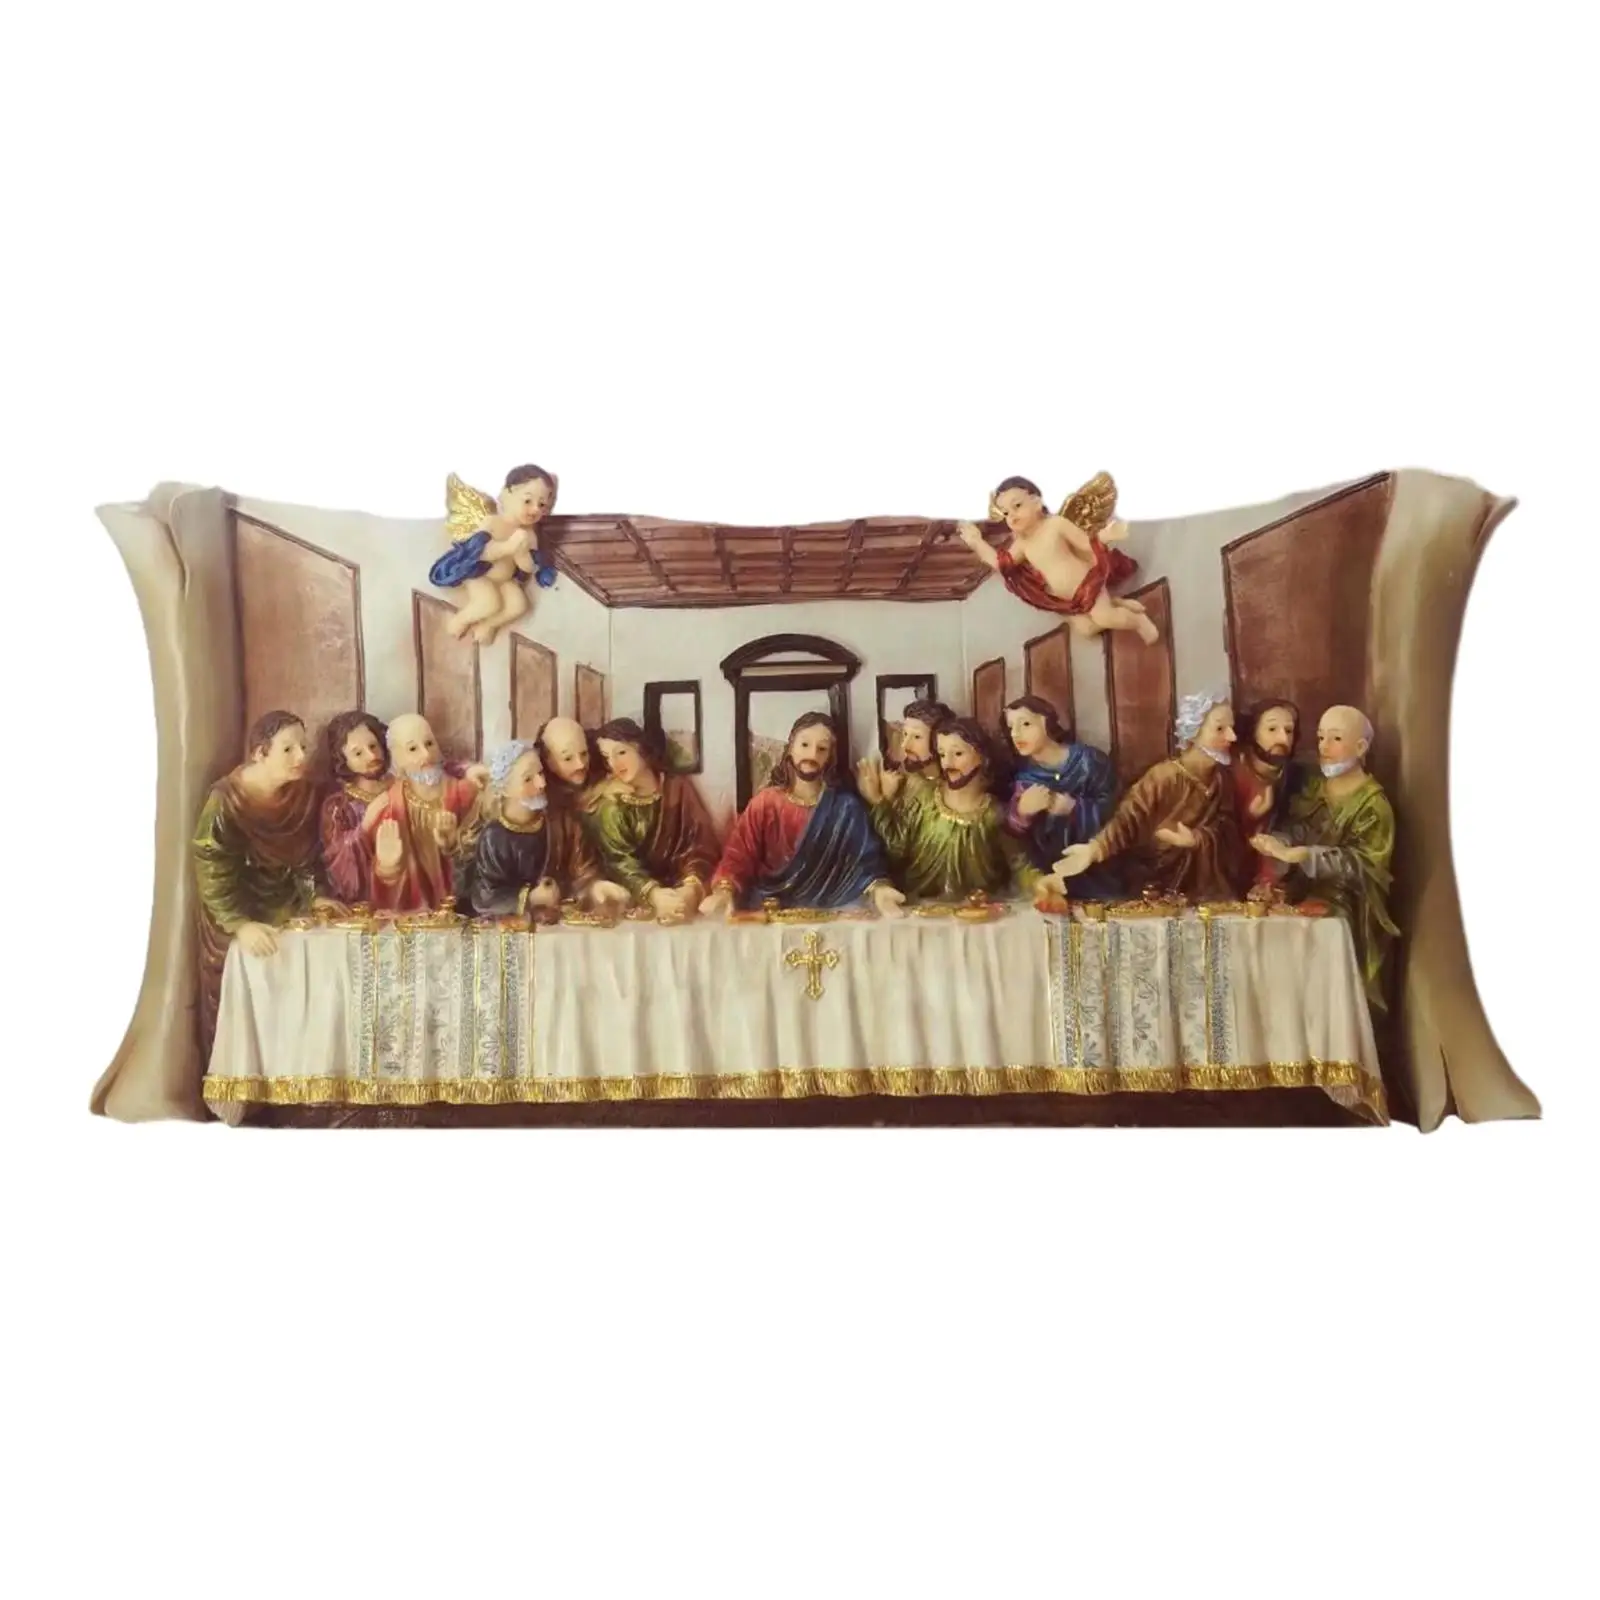 Resin Last Supper Sculpture Statue The Last Supper Scene Artwork Jesus and 12 Disciples for Living Room Ornaments Decoration